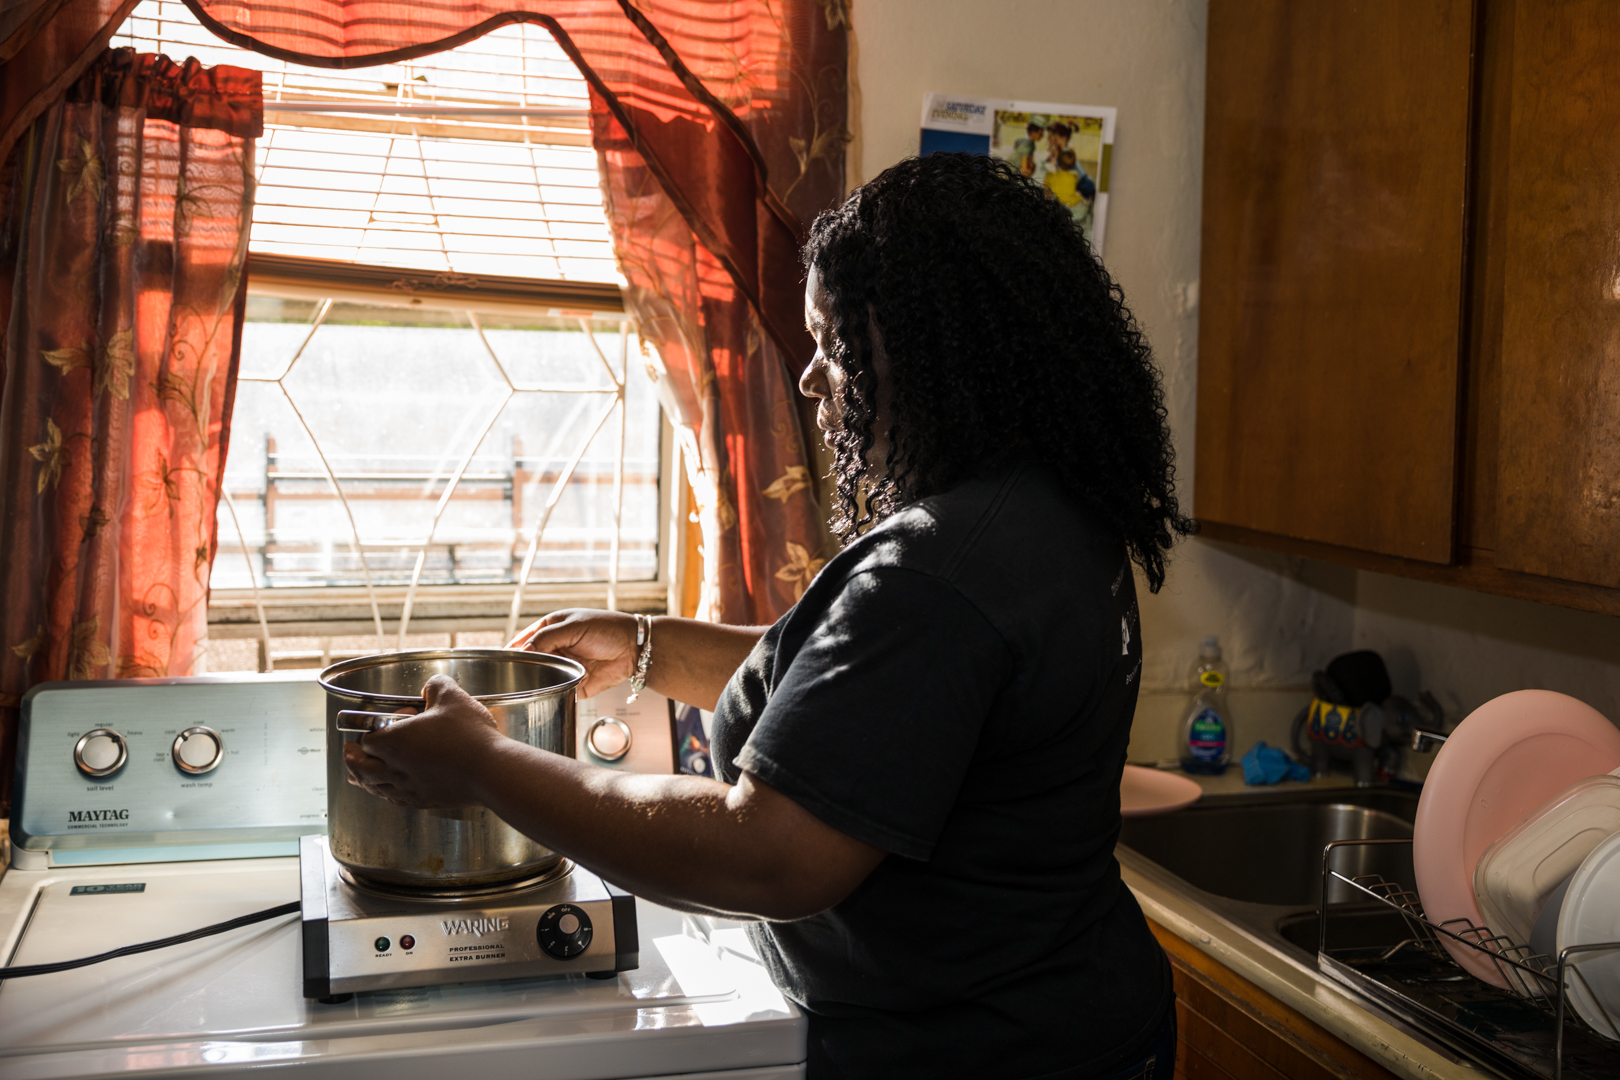 Sherry Roberson prepares to boil a pot of water on the hot plate NYCHA provided for her. She cooks for a four-person family. Eagle photo by Paul Frangipane